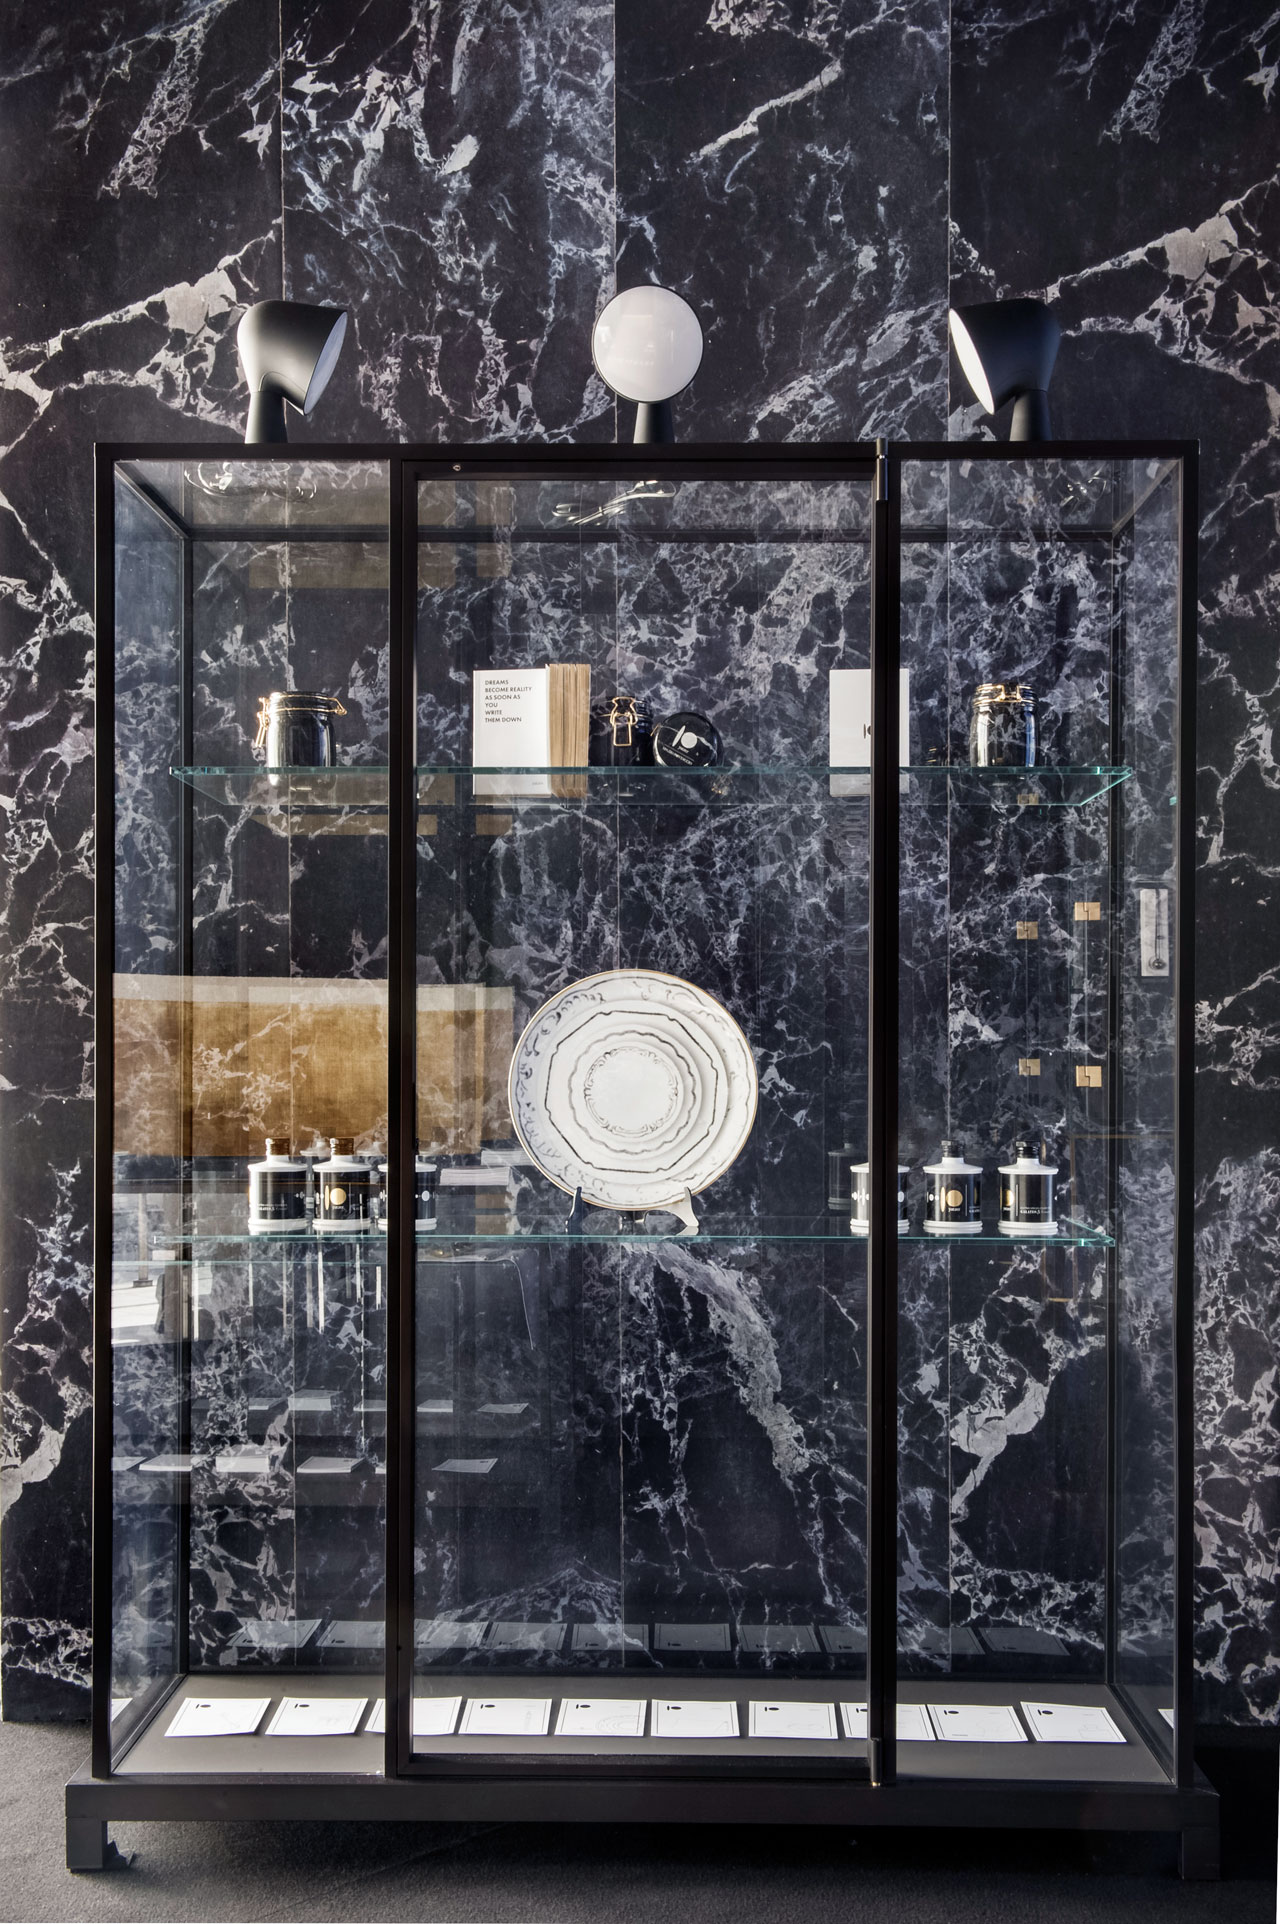 10 by Yatzer installation view at Spazio Pontaccio, Milan 2016. Wunderkammer High Display Case by Piero Lissoni for Glas Italia. Materials Wallpaper in black marble by Piet Hein Eek for NLXL. Styling by Costas Voyatzis, photo by Fabrizio Annibali. 